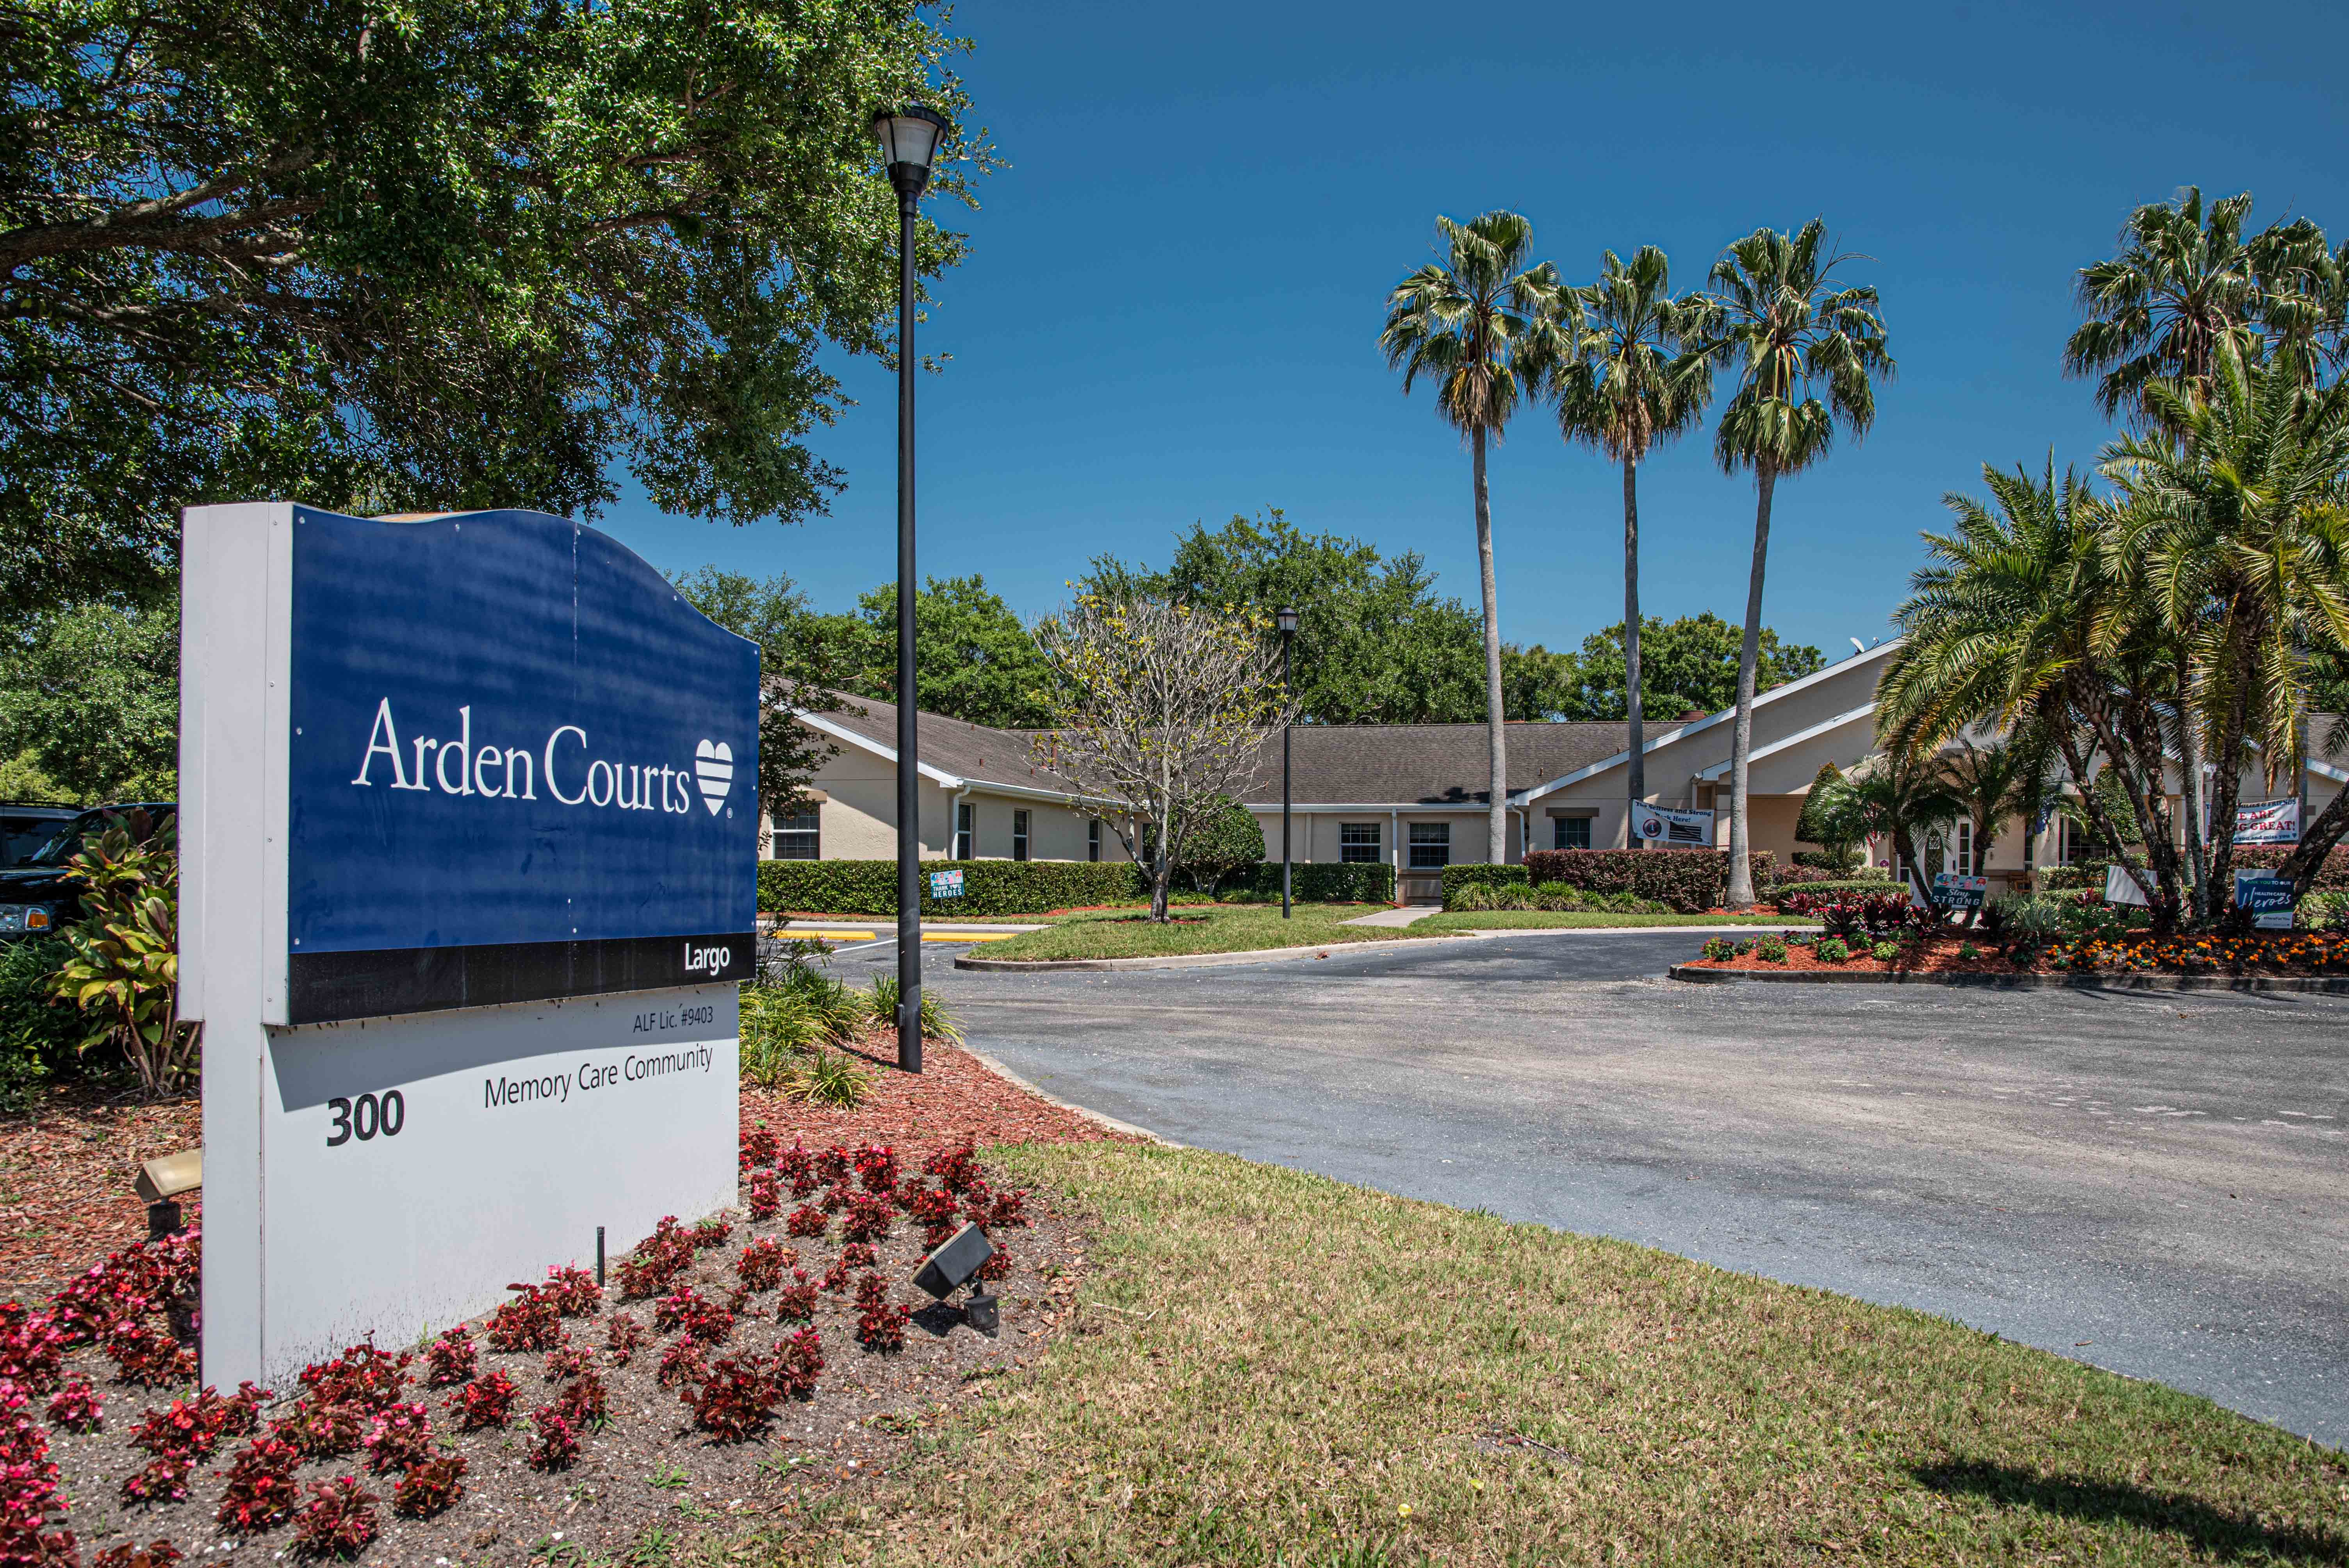 Photo of Arden Courts A ProMedica Memory Care Community in Largo